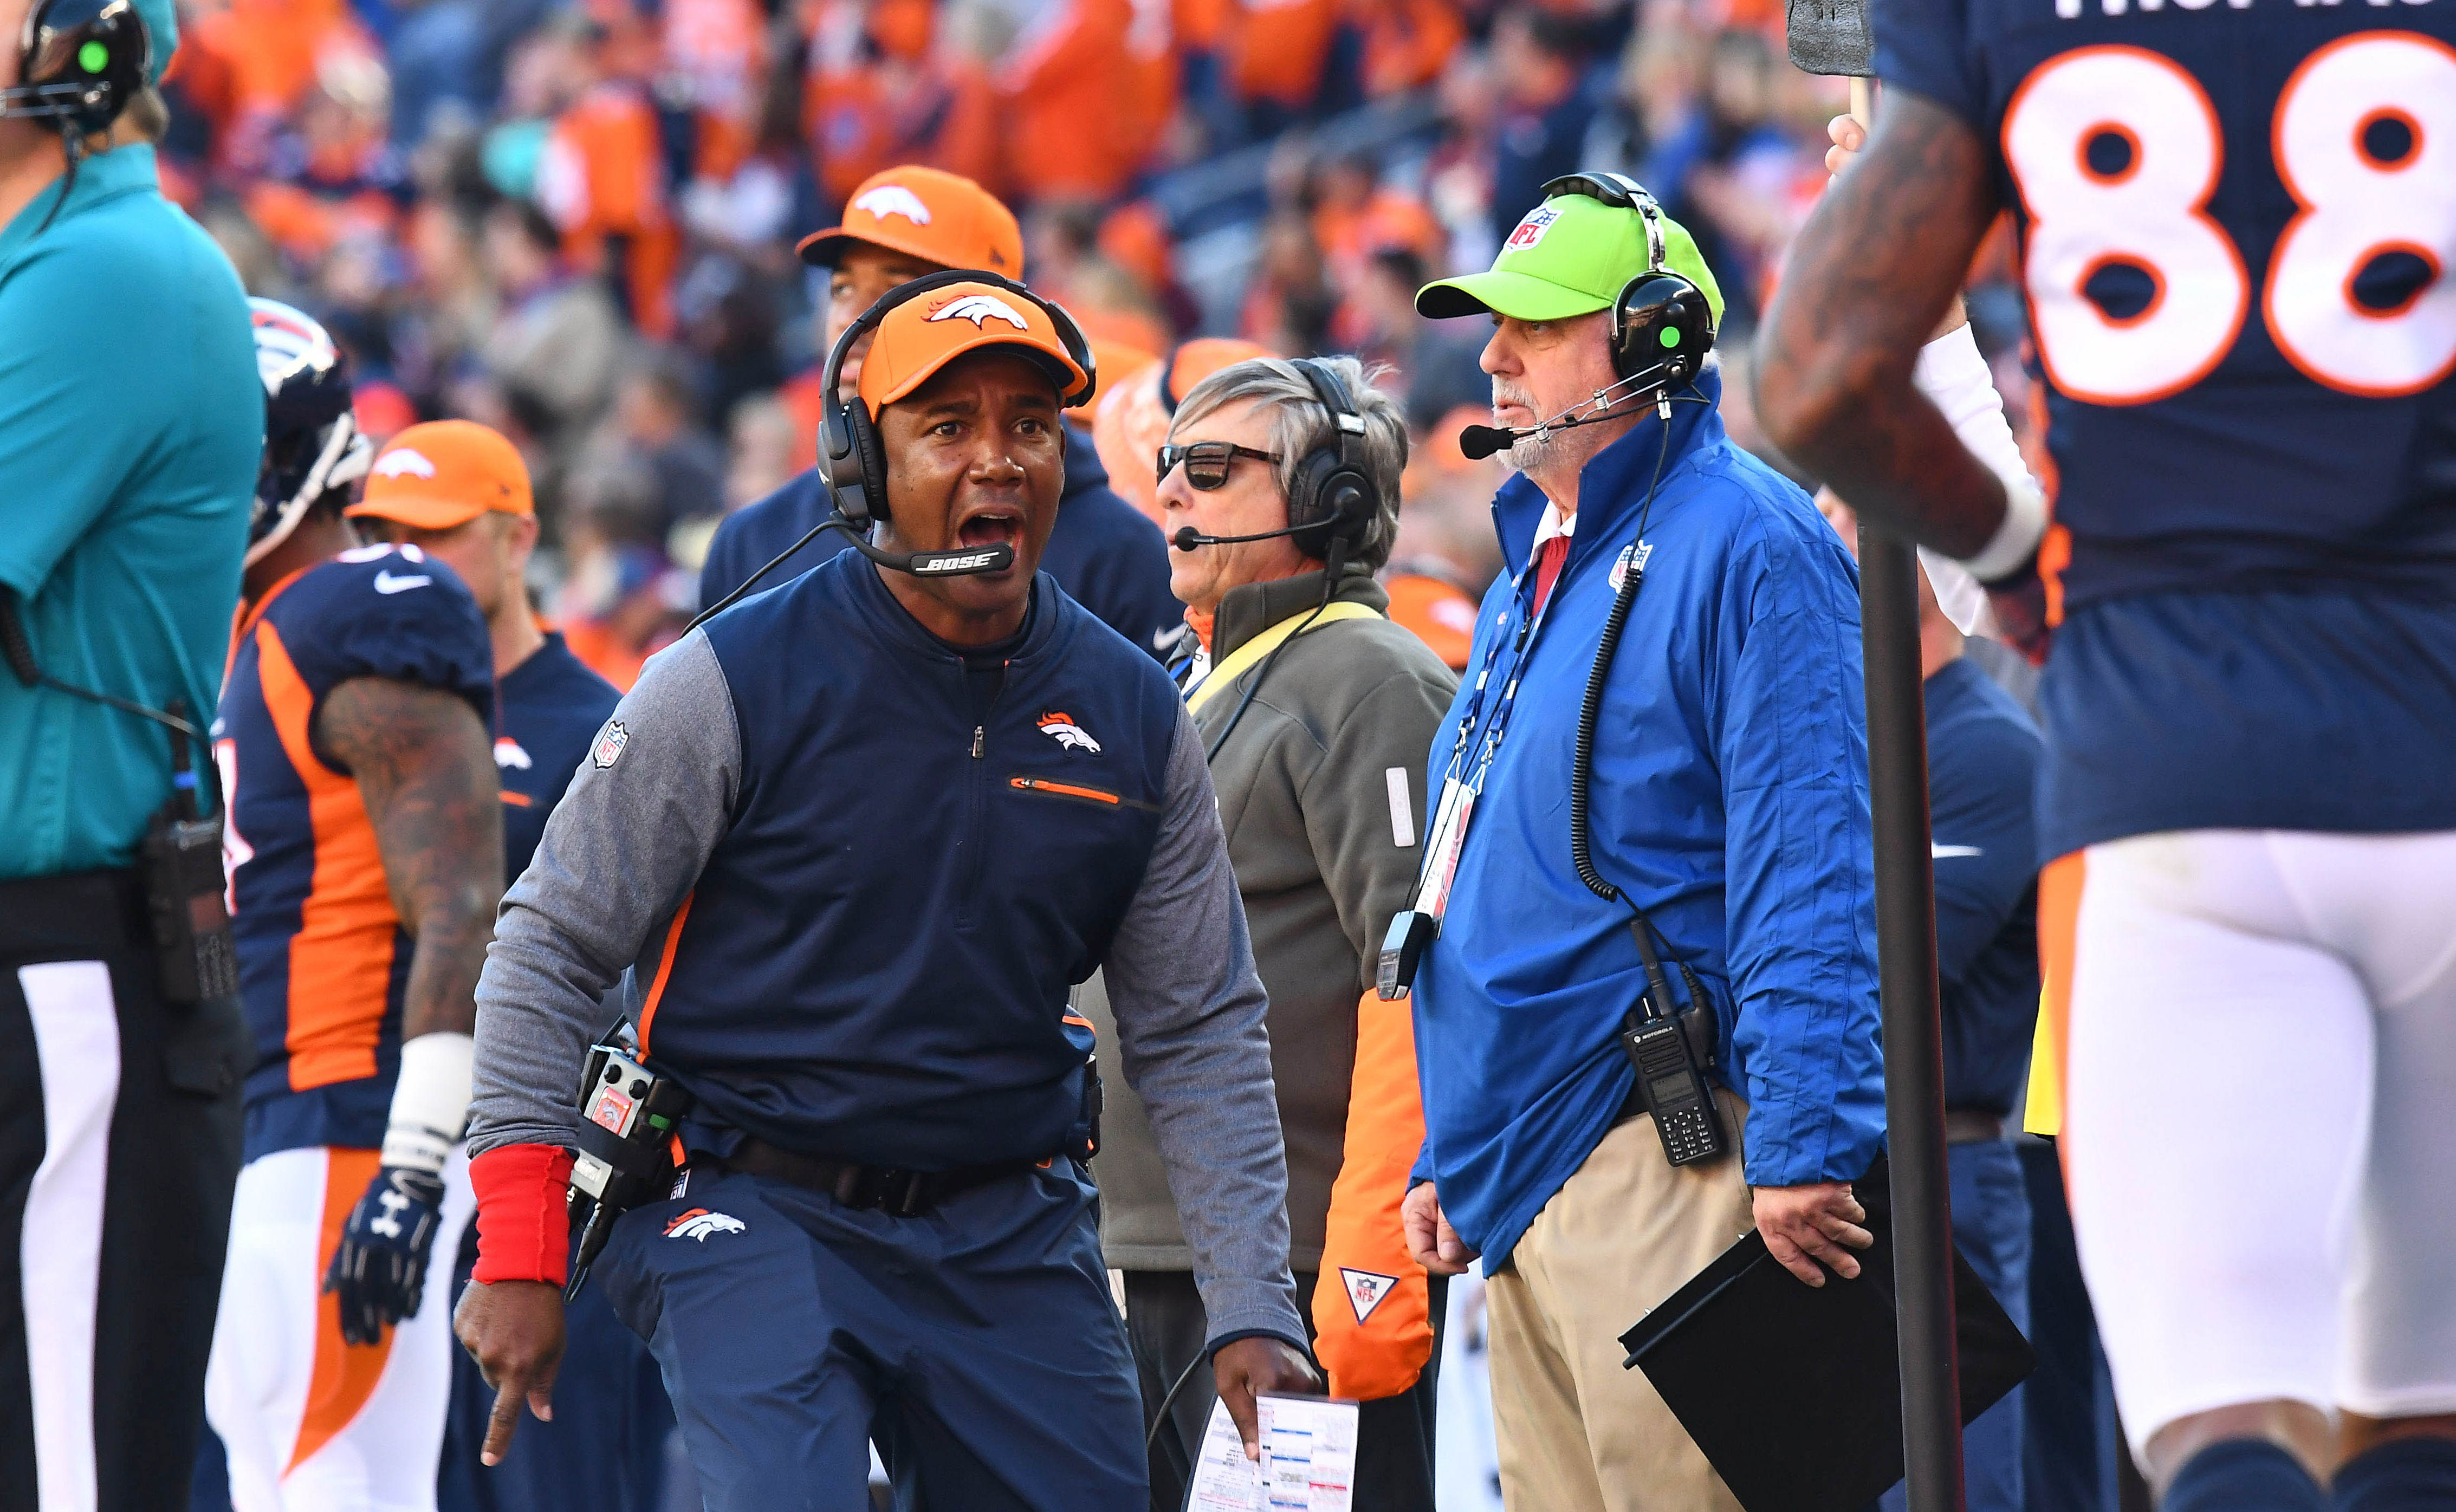 Dec 10, 2017; Denver, CO, USA; Denver Broncos wide receiver coach Tyke Tolbert reacts in the first half against the New York Jets at Sports Authority Field at Mile High. Mandatory Credit: Ron Chenoy-USA TODAY Sports